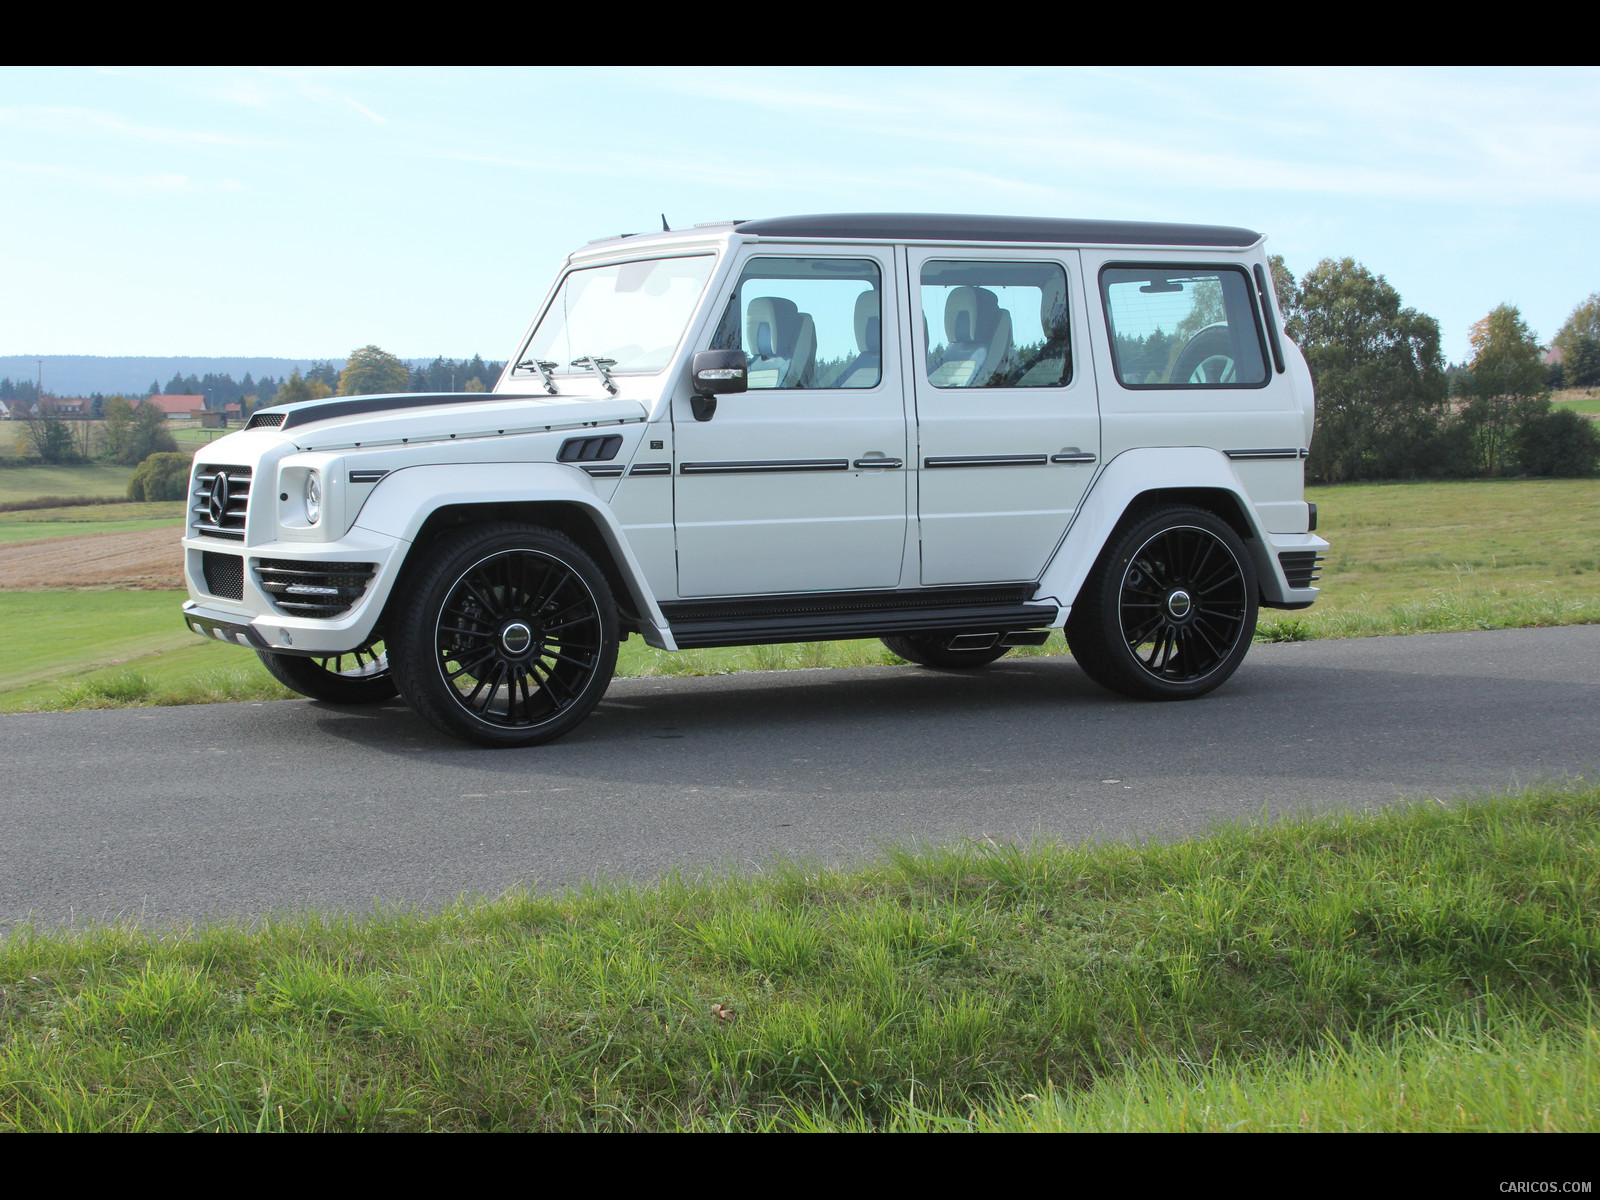 Mansory G-Couture based on Mercedes G-Class White - Side, #27 of 39